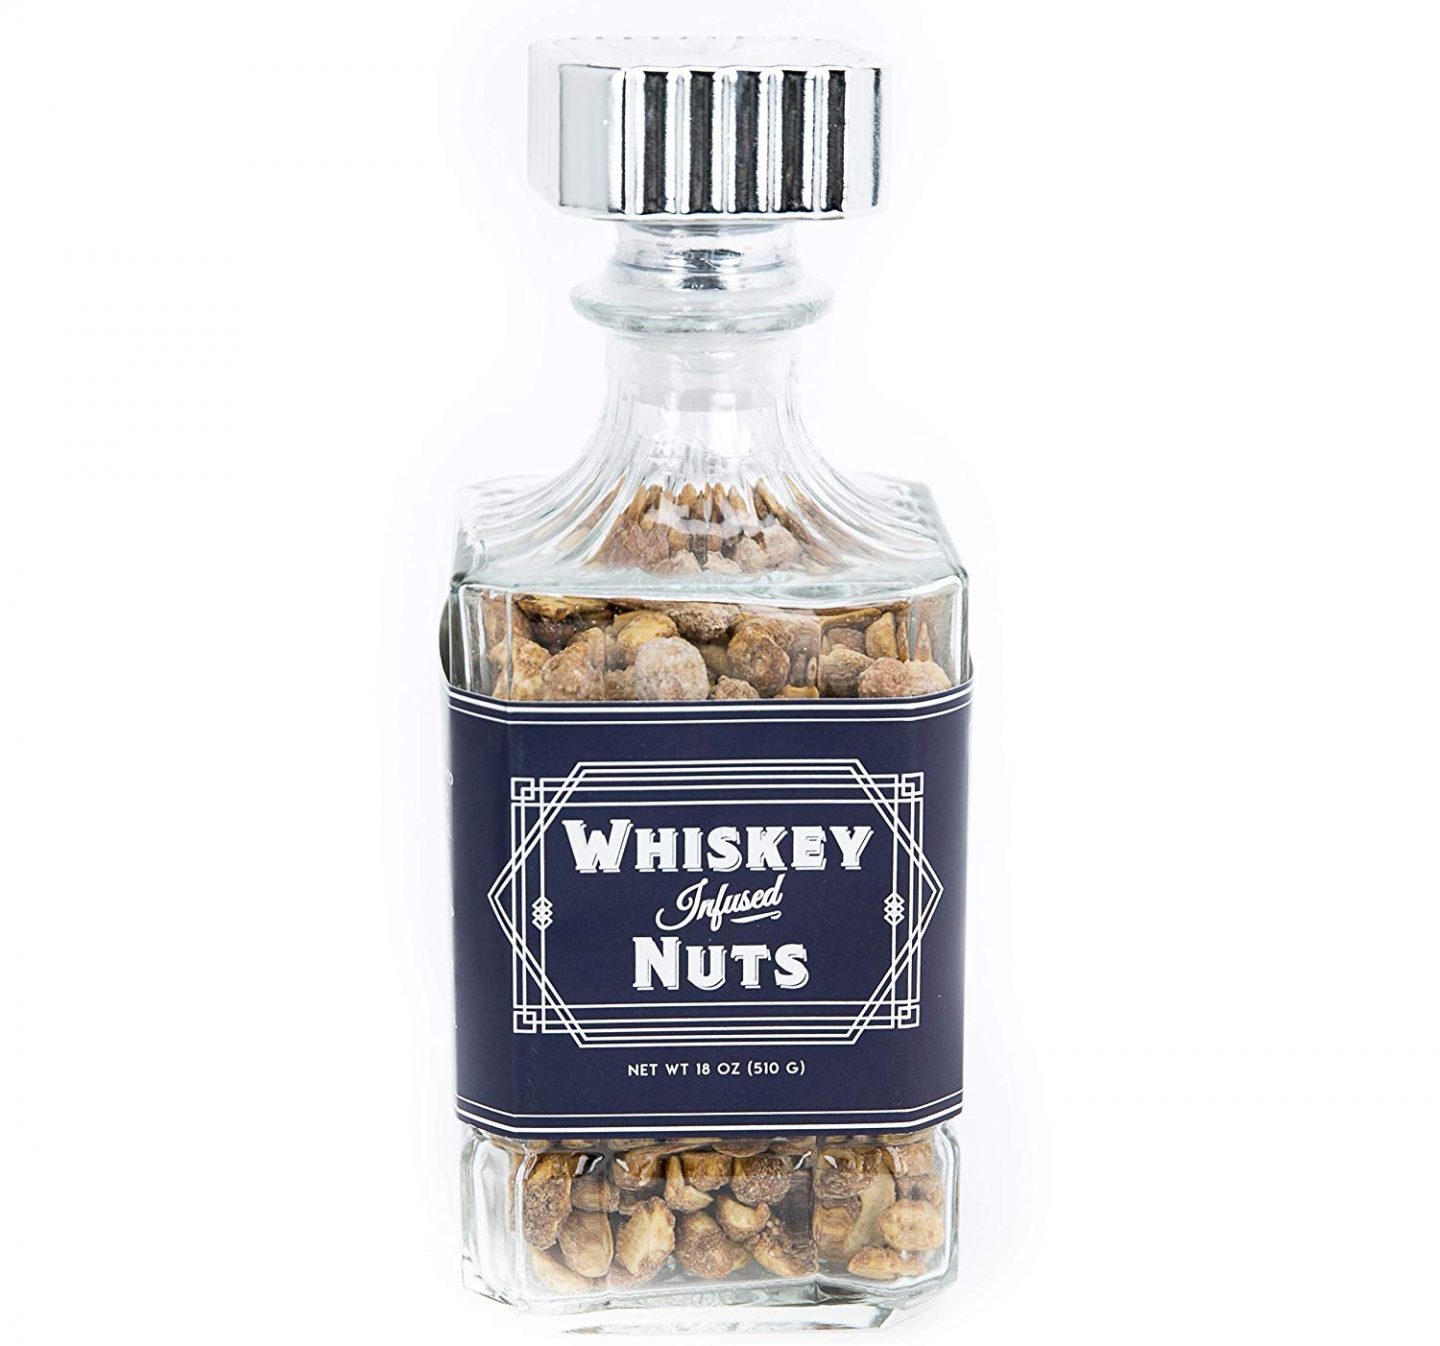 whisky nuts decanter